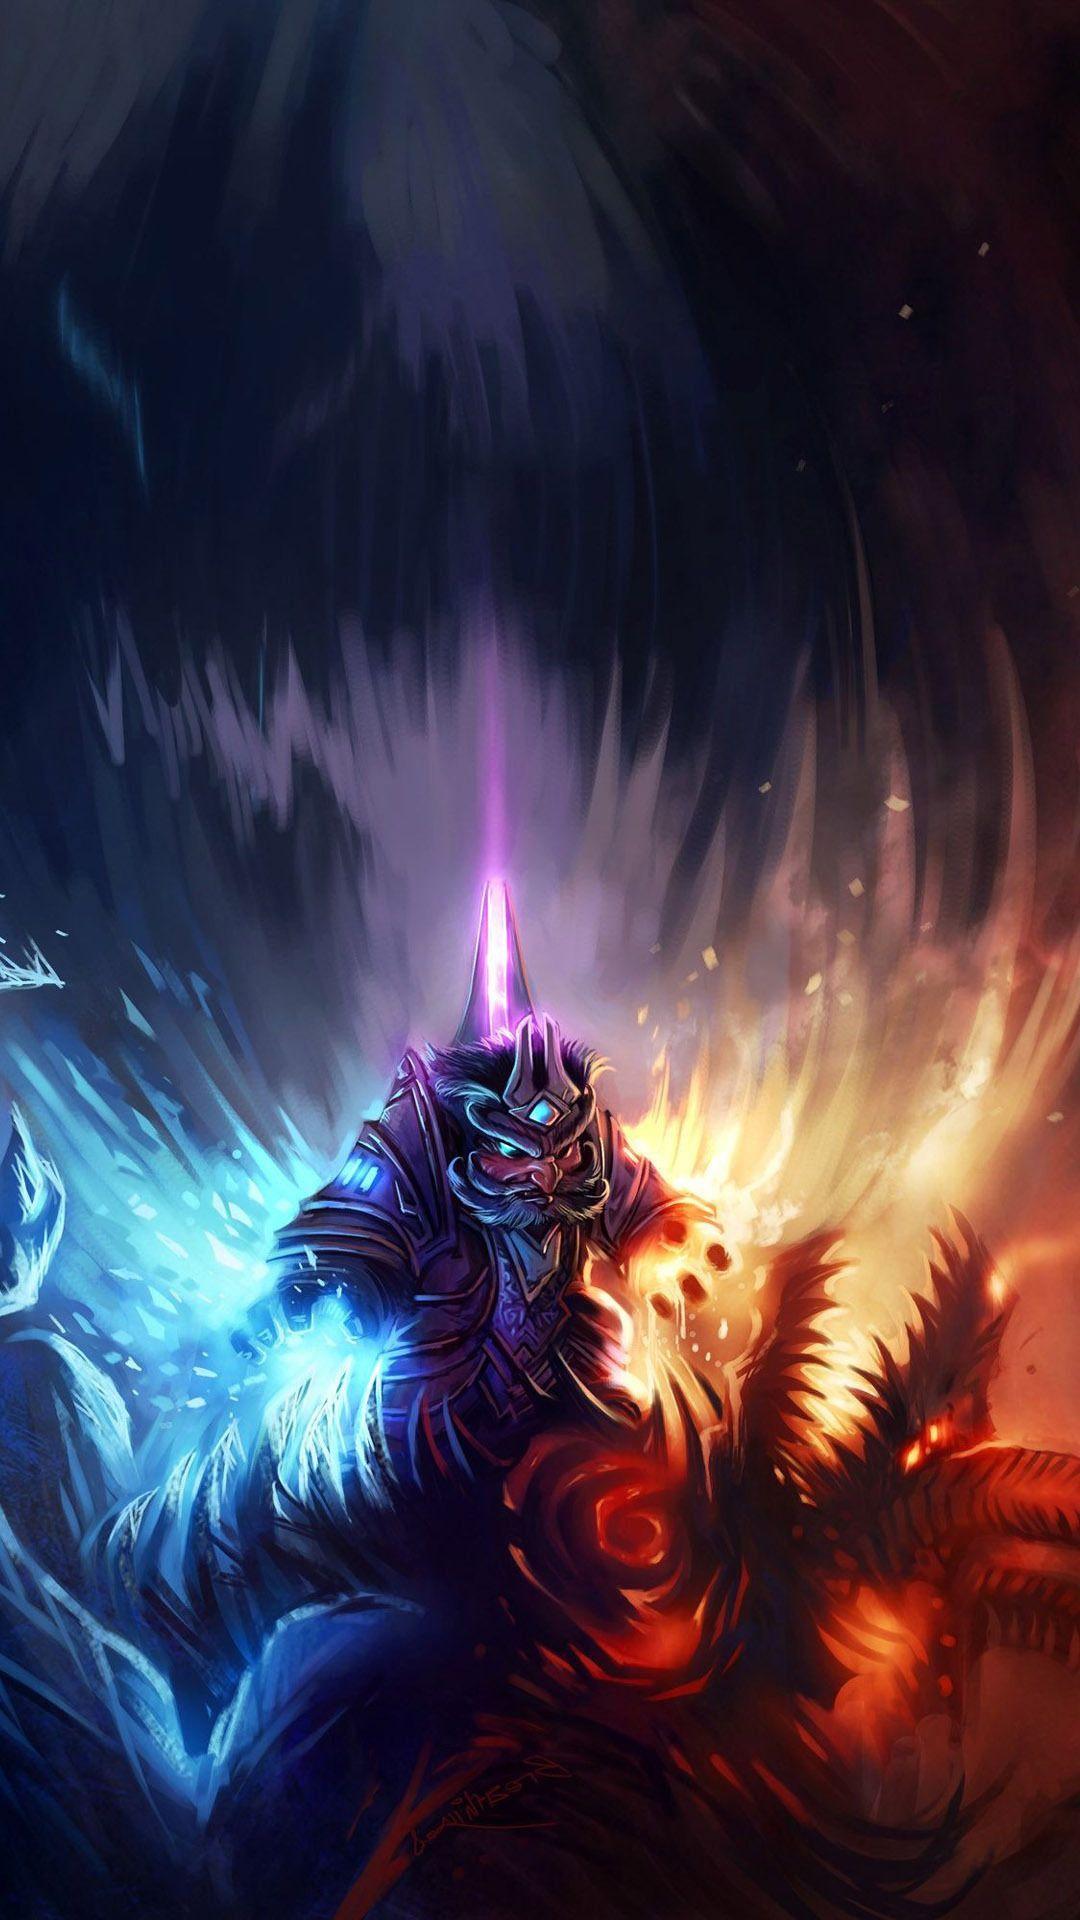 World Of Warcraft Cell Phone Wallpaper. Warcraft in 2019